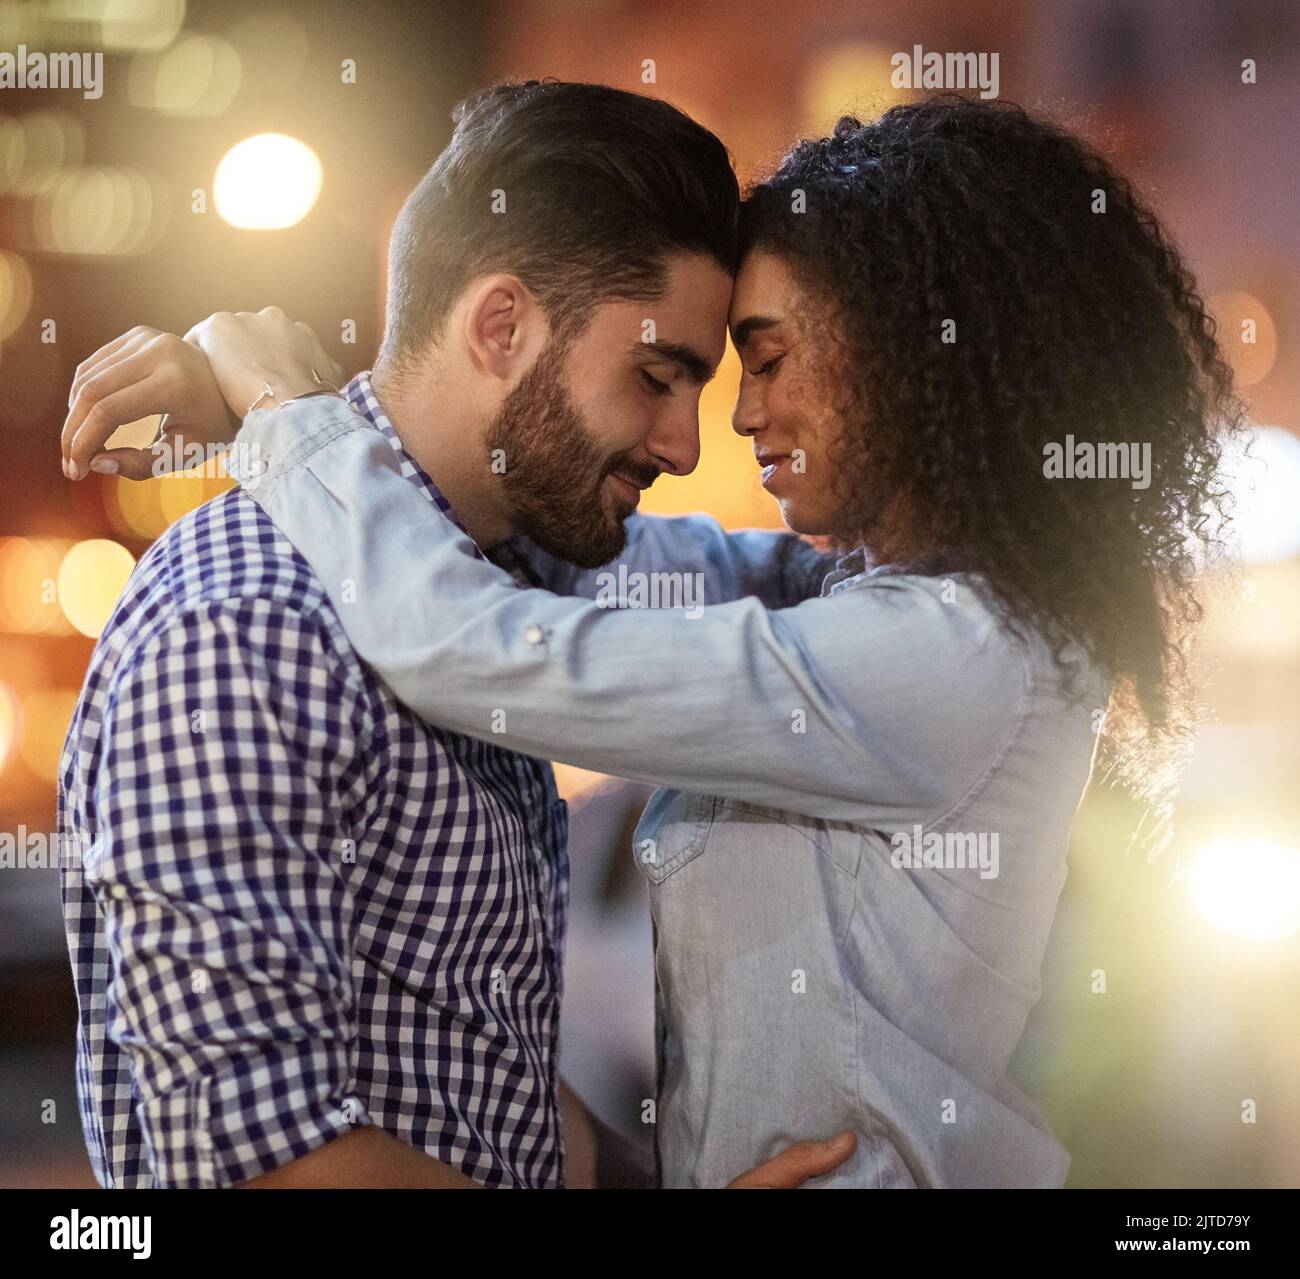 Magic nights under the city lights. an affectionate young couple out on a date in the city. Stock Photo